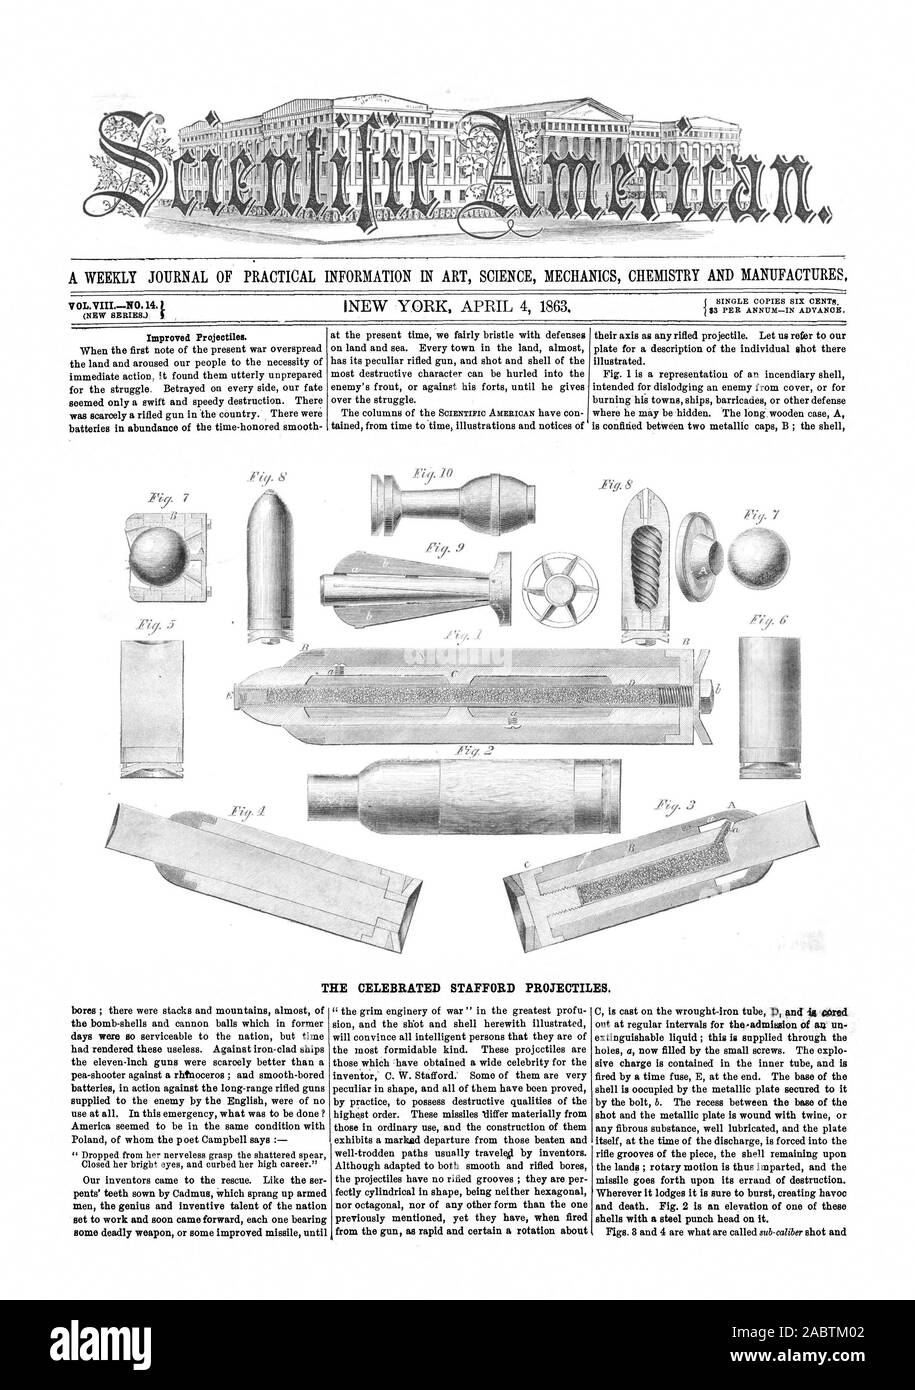 A WEEKLY JOURNAL OF PRACTICAL INFORMATION IN ART SCIENCE MECHANICS CHEMISTRY AND MANUFACTURES V OL.VIIIN0.14. t THE CELEBRATED STAFFORD PROJECTILES. from the gun as rapid and certain a rotation about shells with a steel punch head on it., scientific american, 1863-04-04 Stock Photo